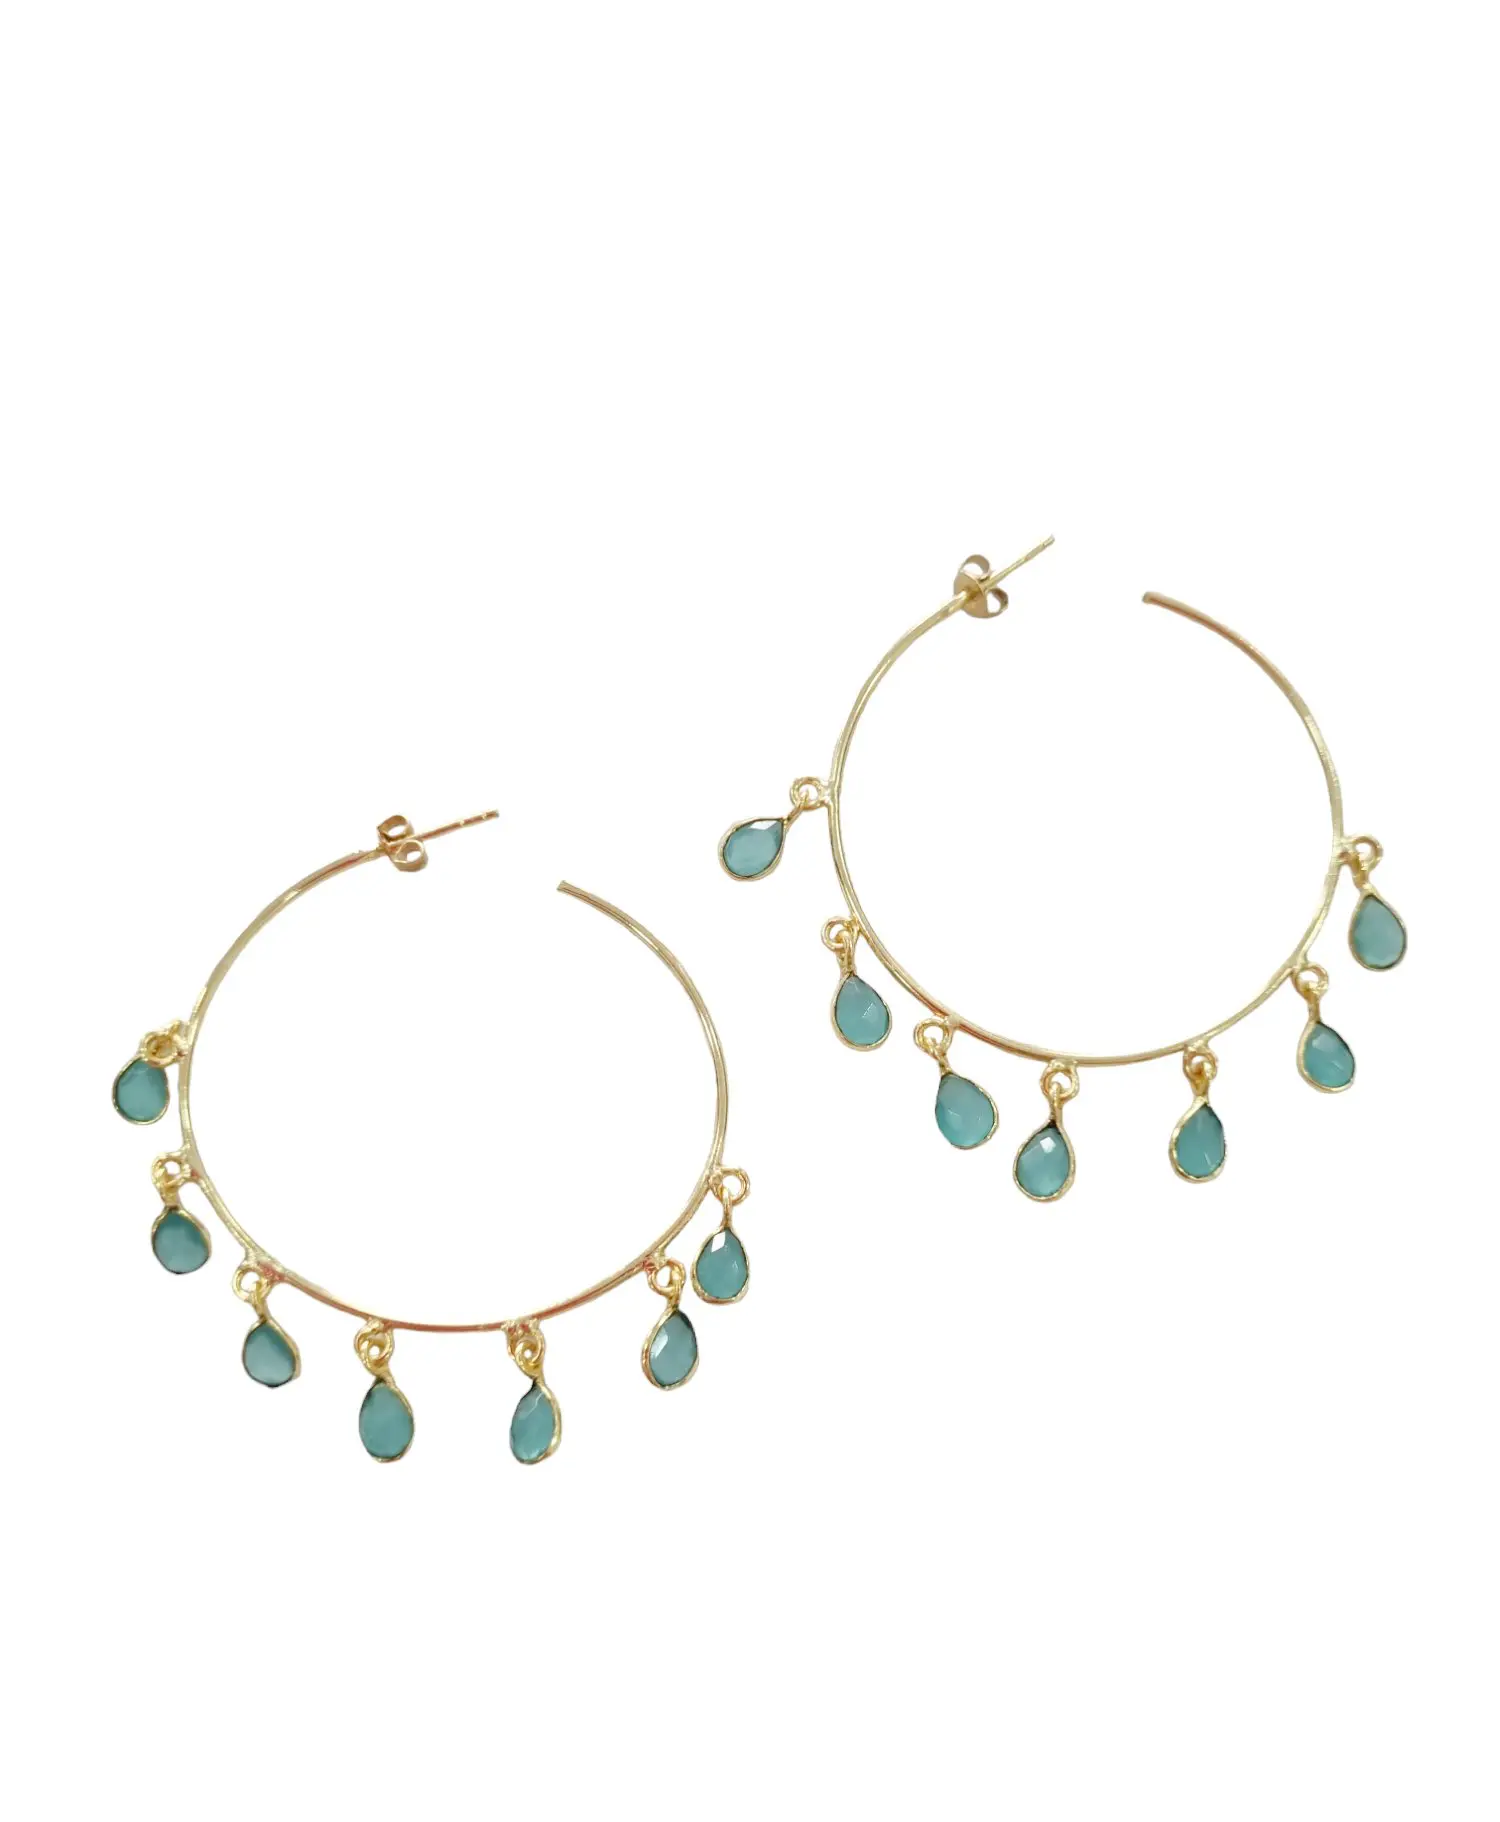 Hoop earrings made of brass with hanging quartz drops in aquamarine colour.Circumference of hoops 5cmWeight 3.1gr